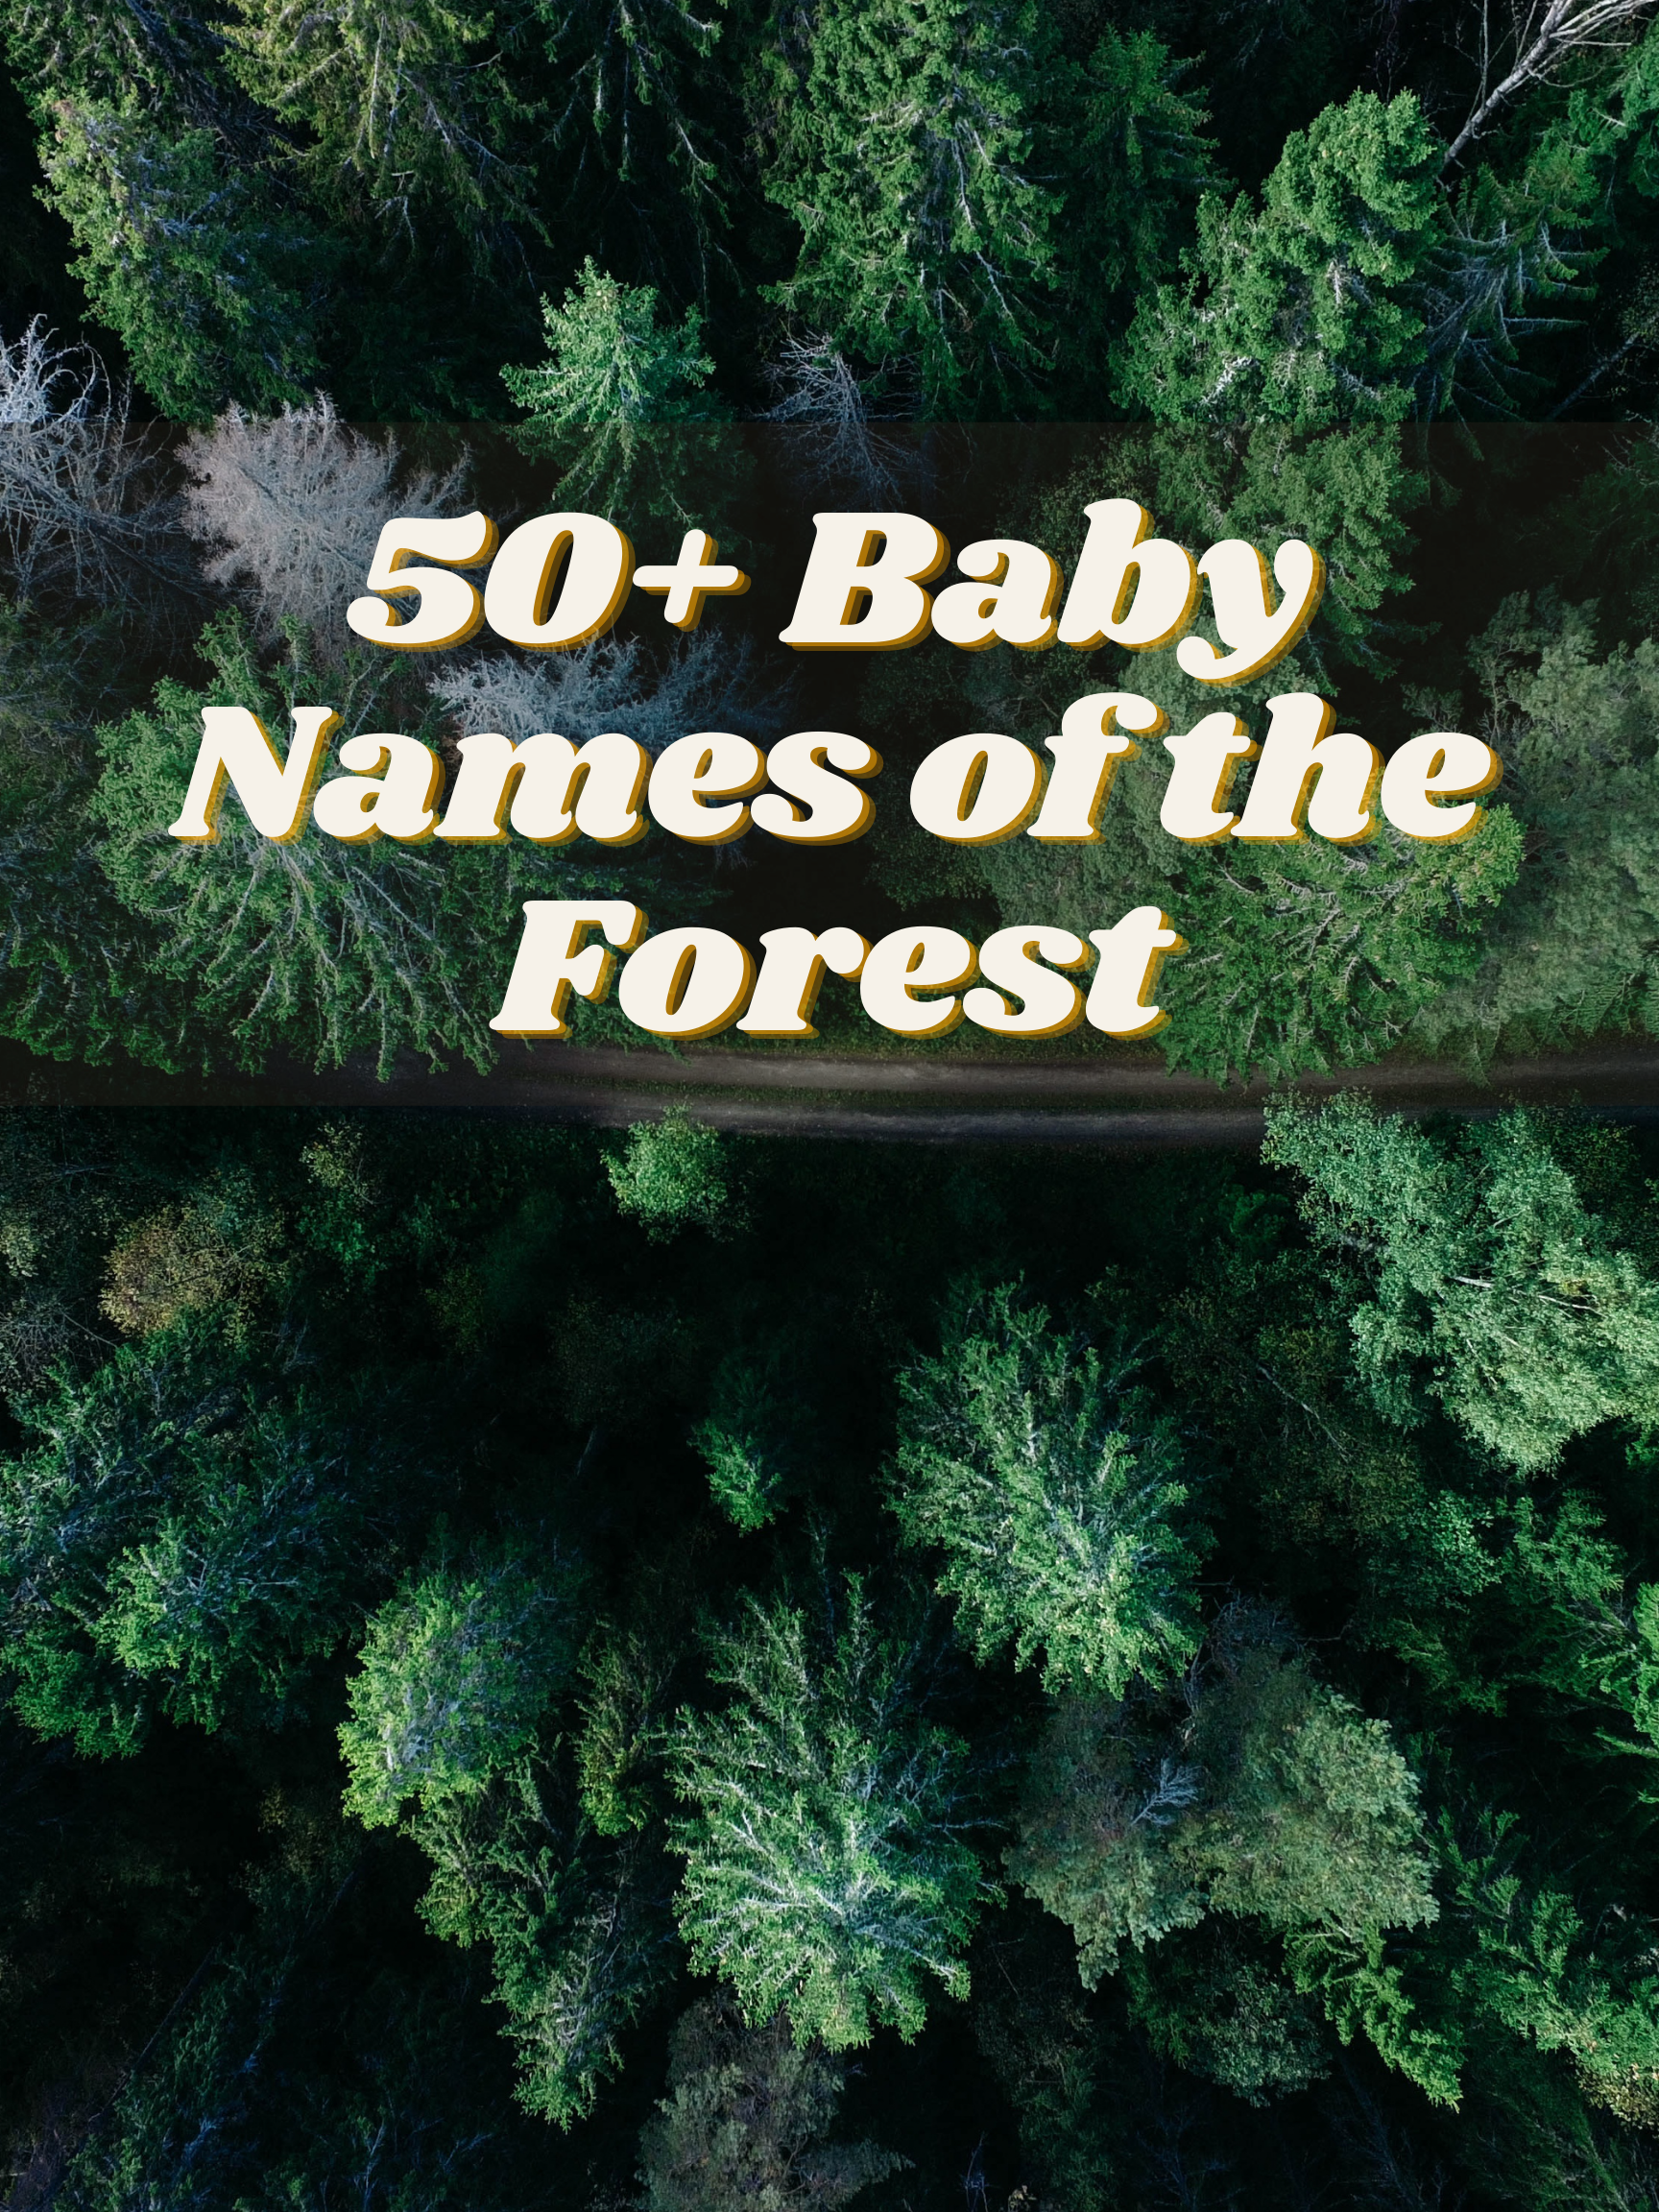 50+ Baby Names of the Forest